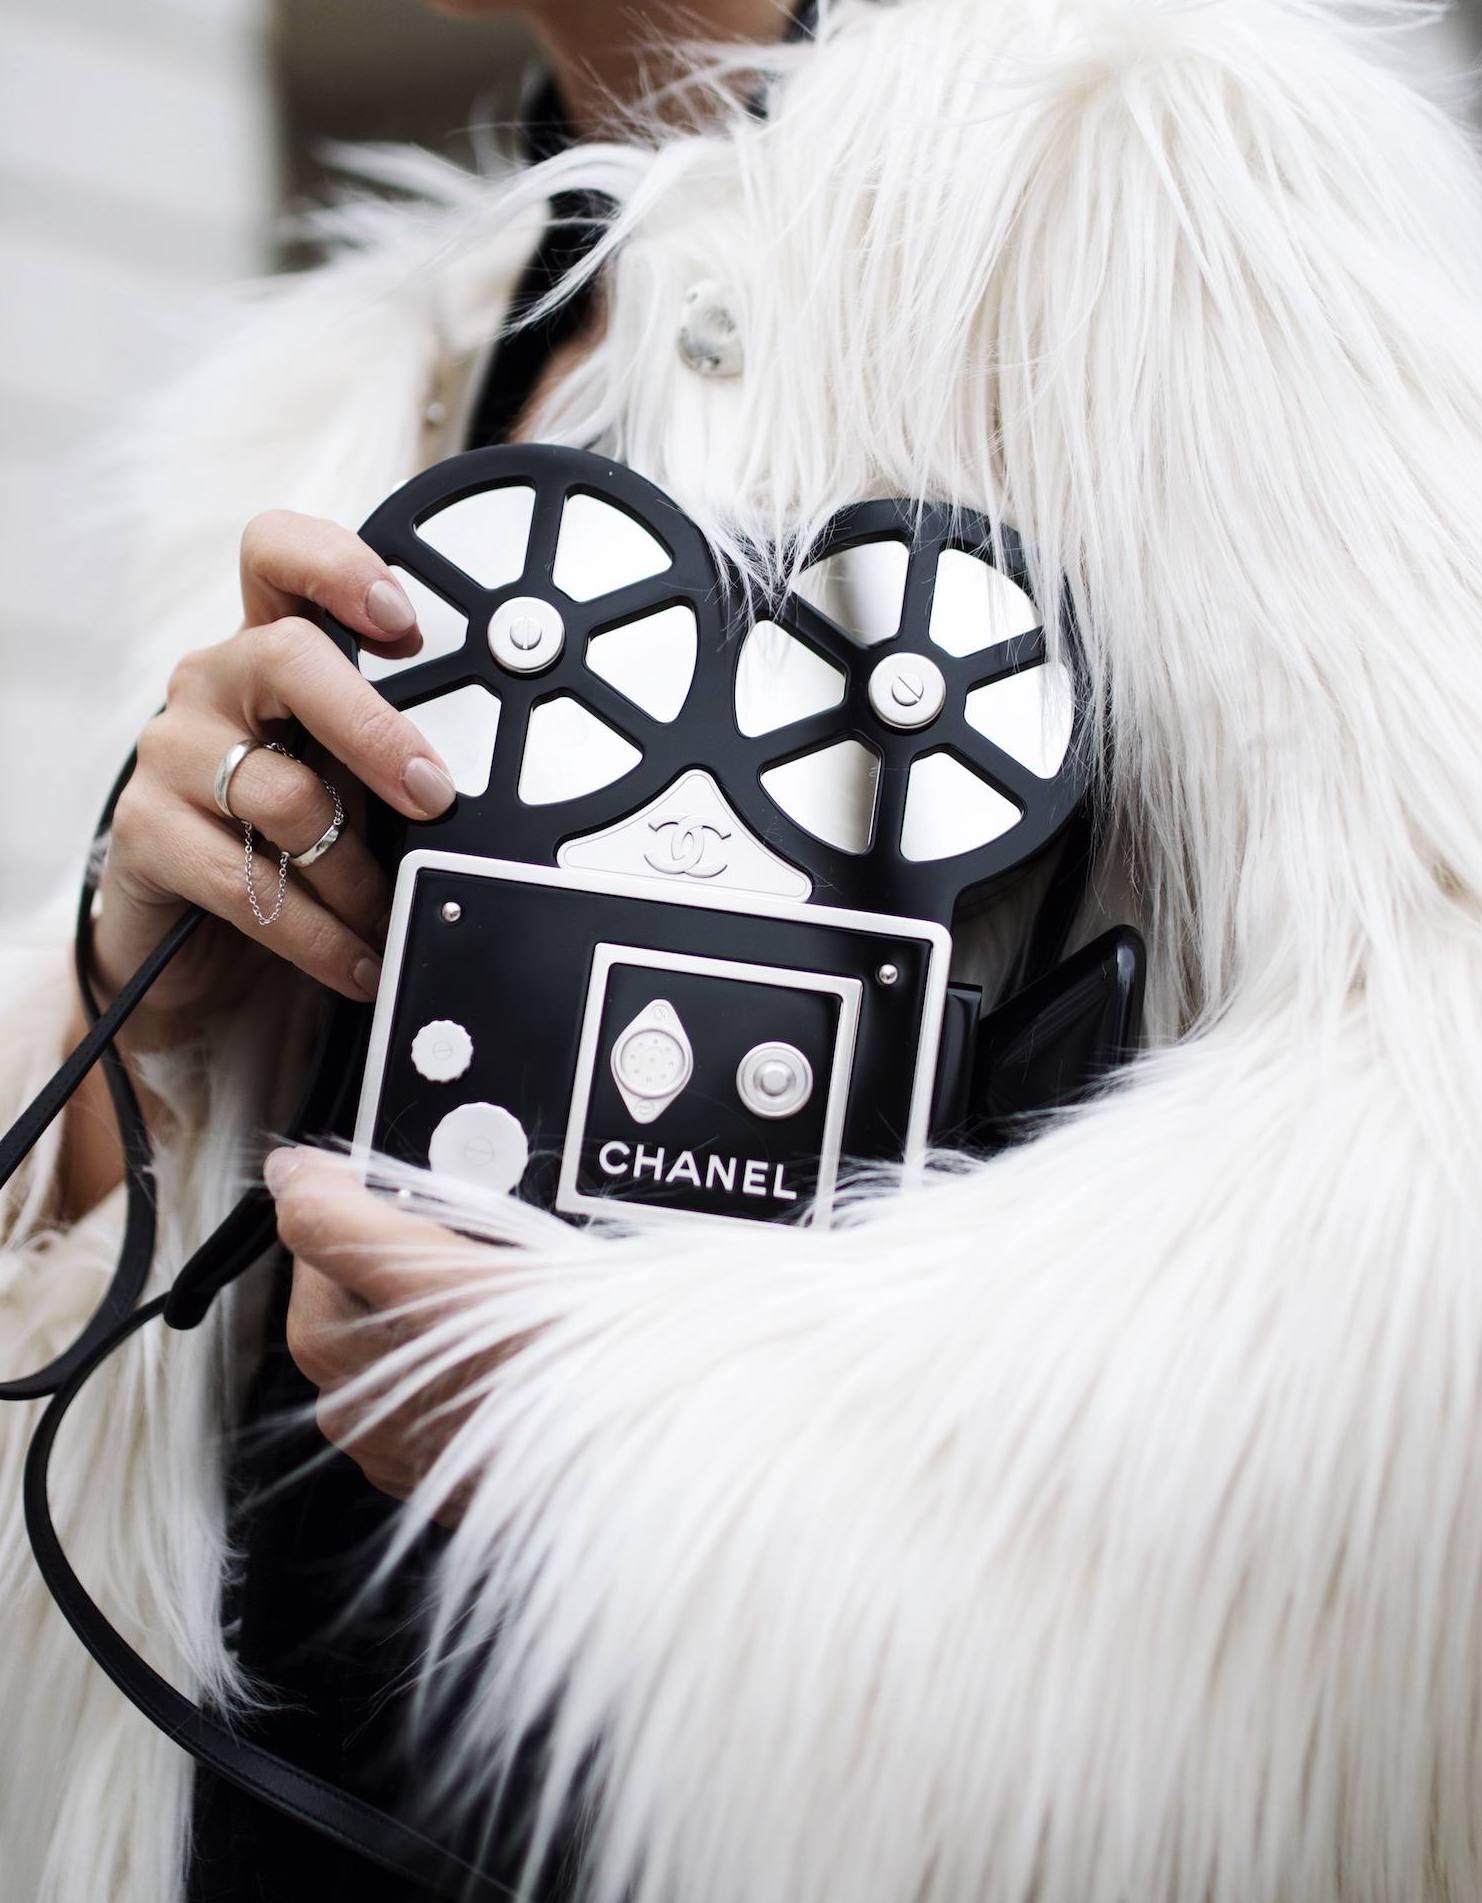 One of the World's Most Luxurious Chanel Bags.

From Chanel's 2016 Runway collection, this stunning resin and crystal encrusted film bag is hailed as of the world's most luxurious Chanel bags.  Produced in limited quantities, it is a rare find for